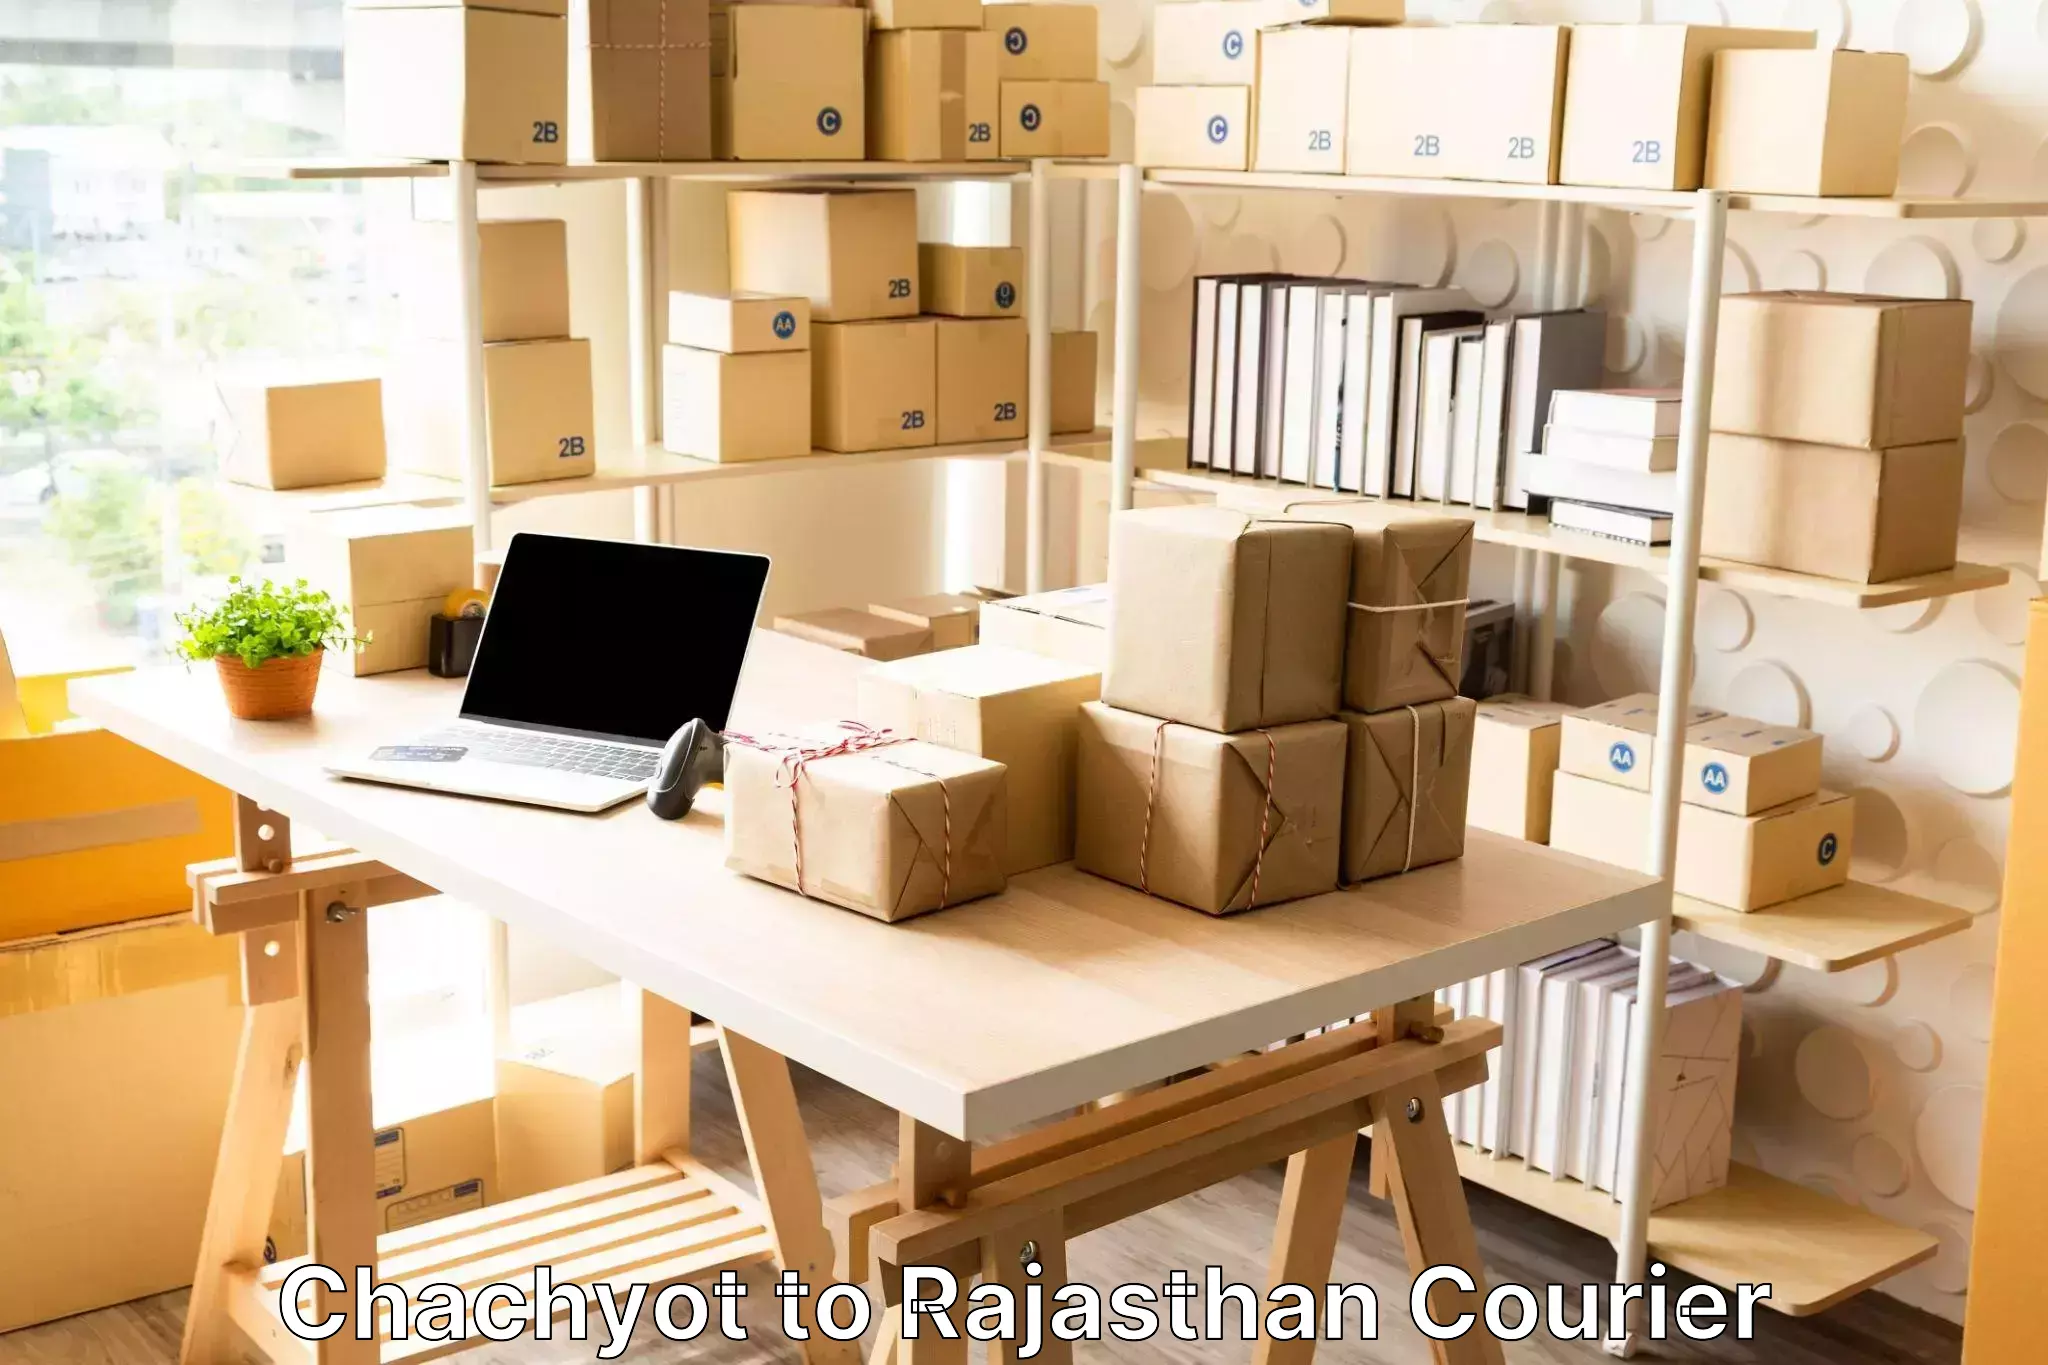 Baggage delivery scheduling Chachyot to Rajasthan